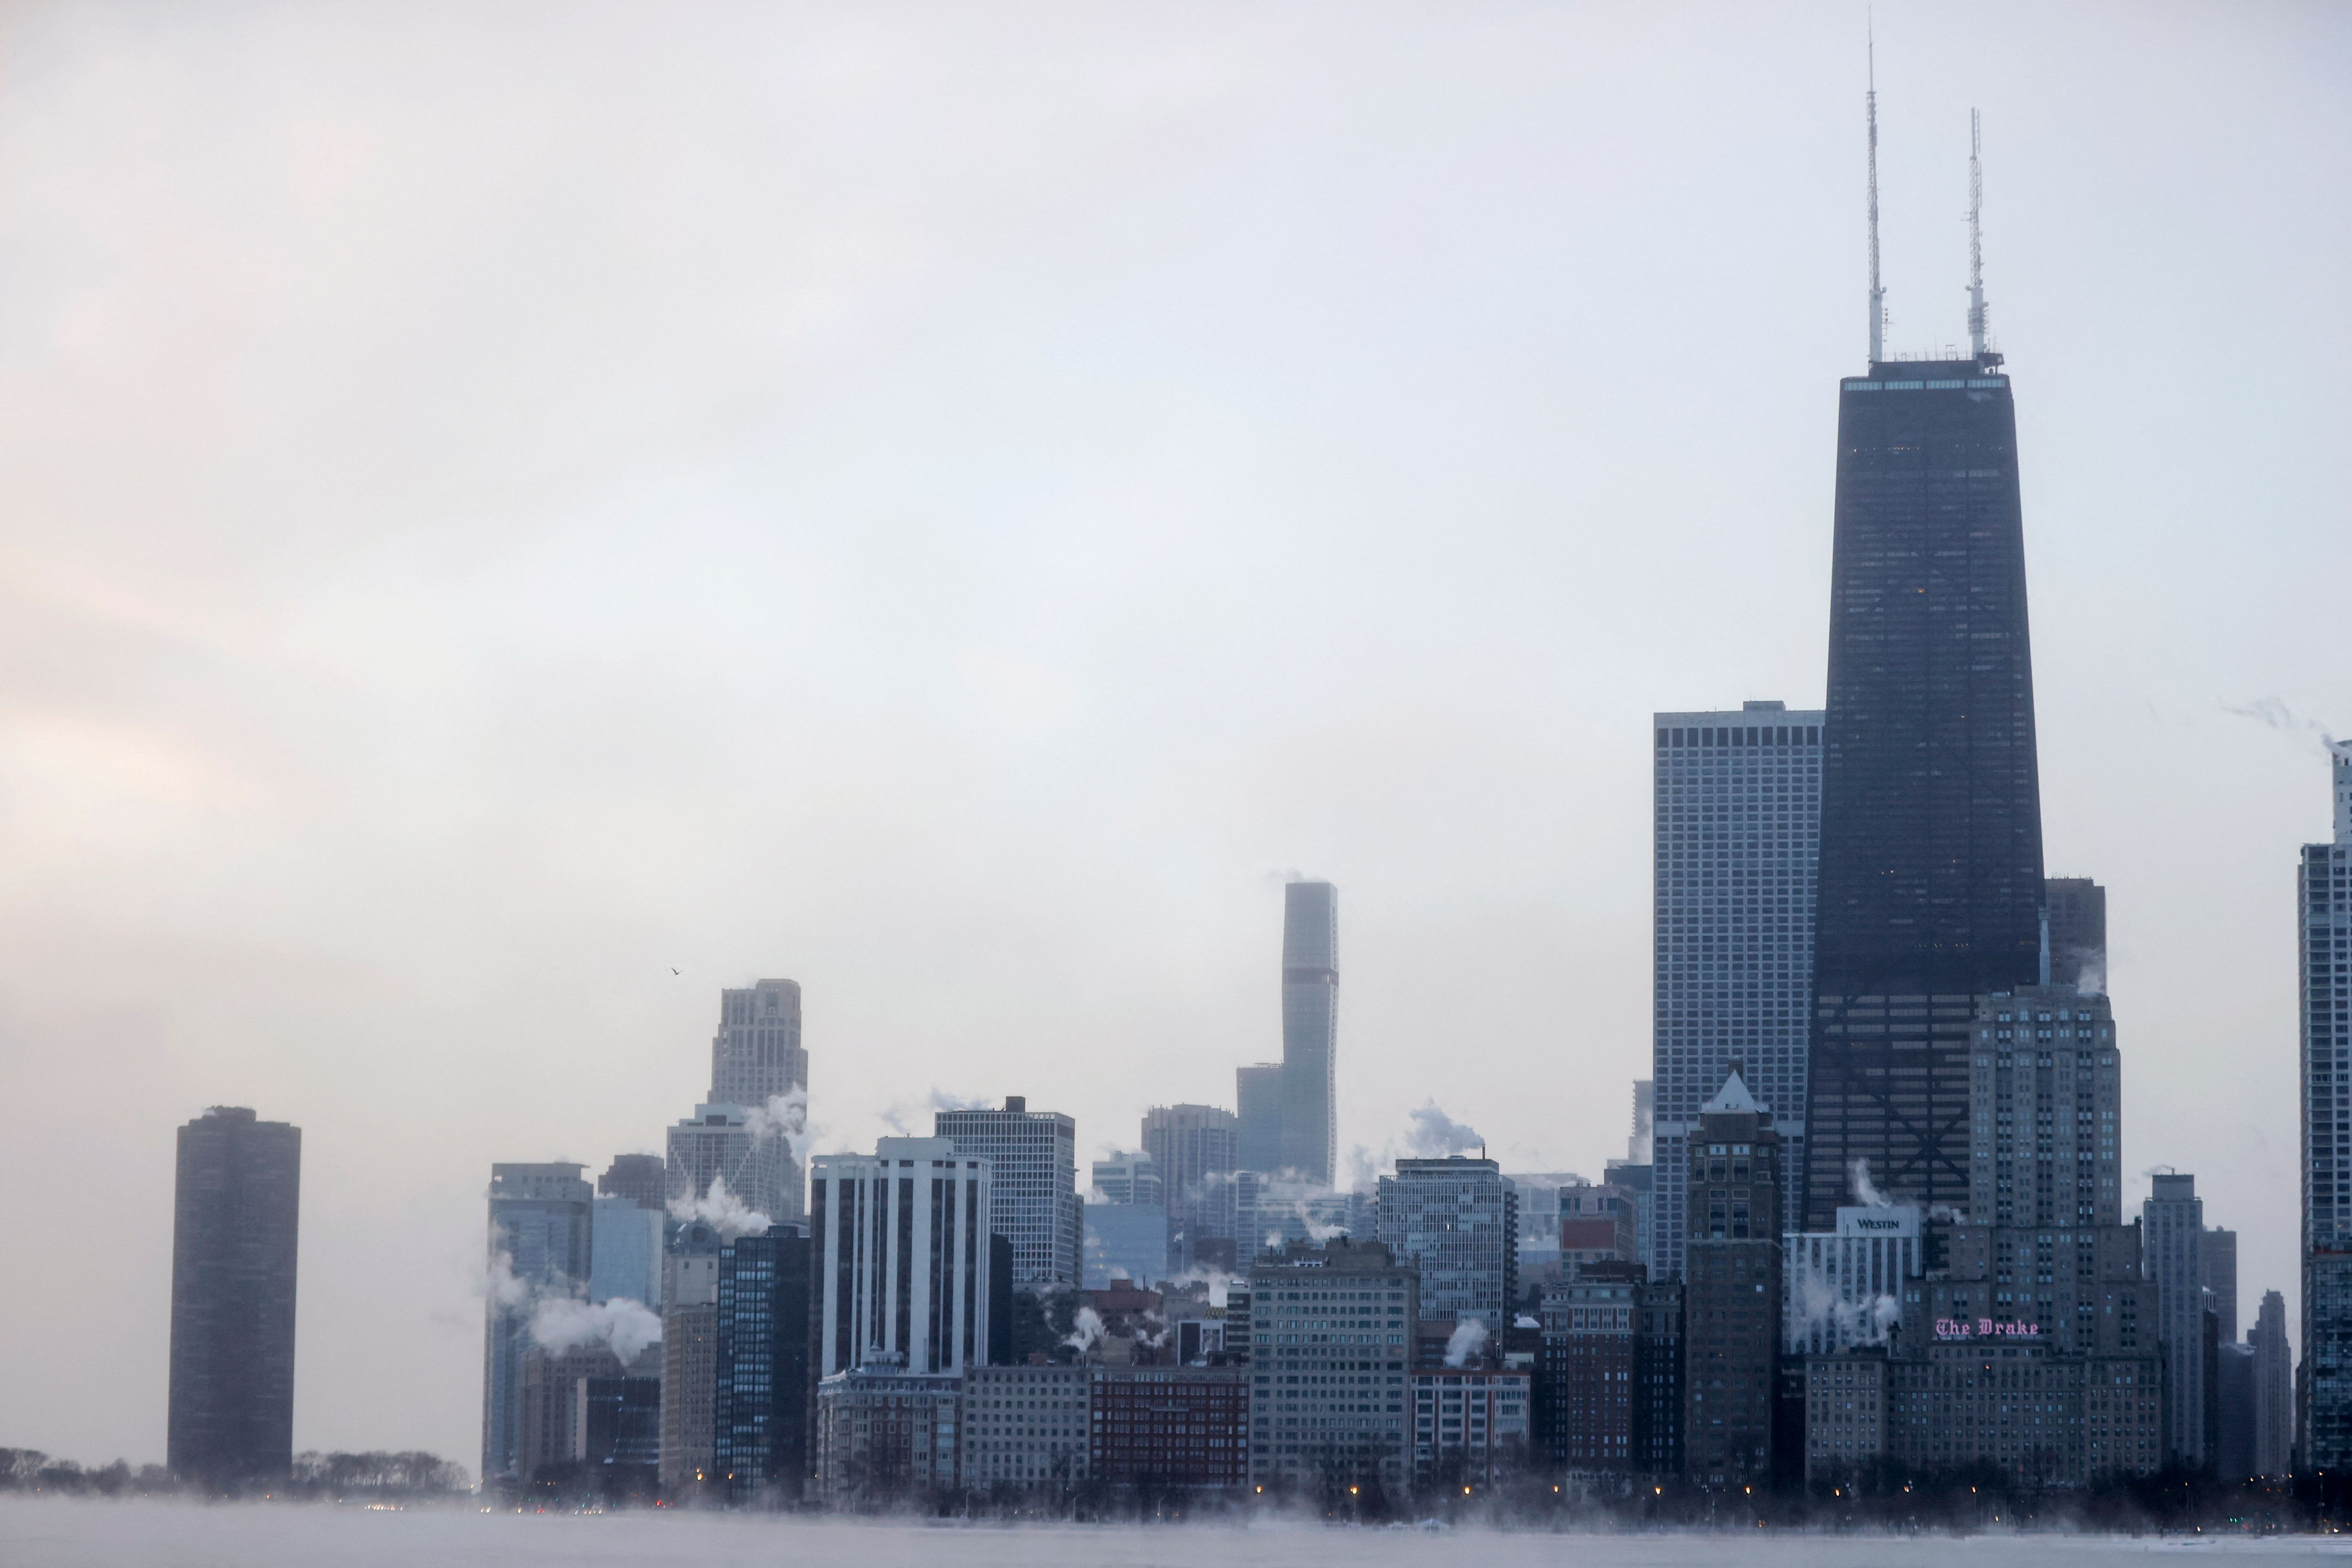 Chicago briefly sees 1 degree temps, but subzero weather will returns